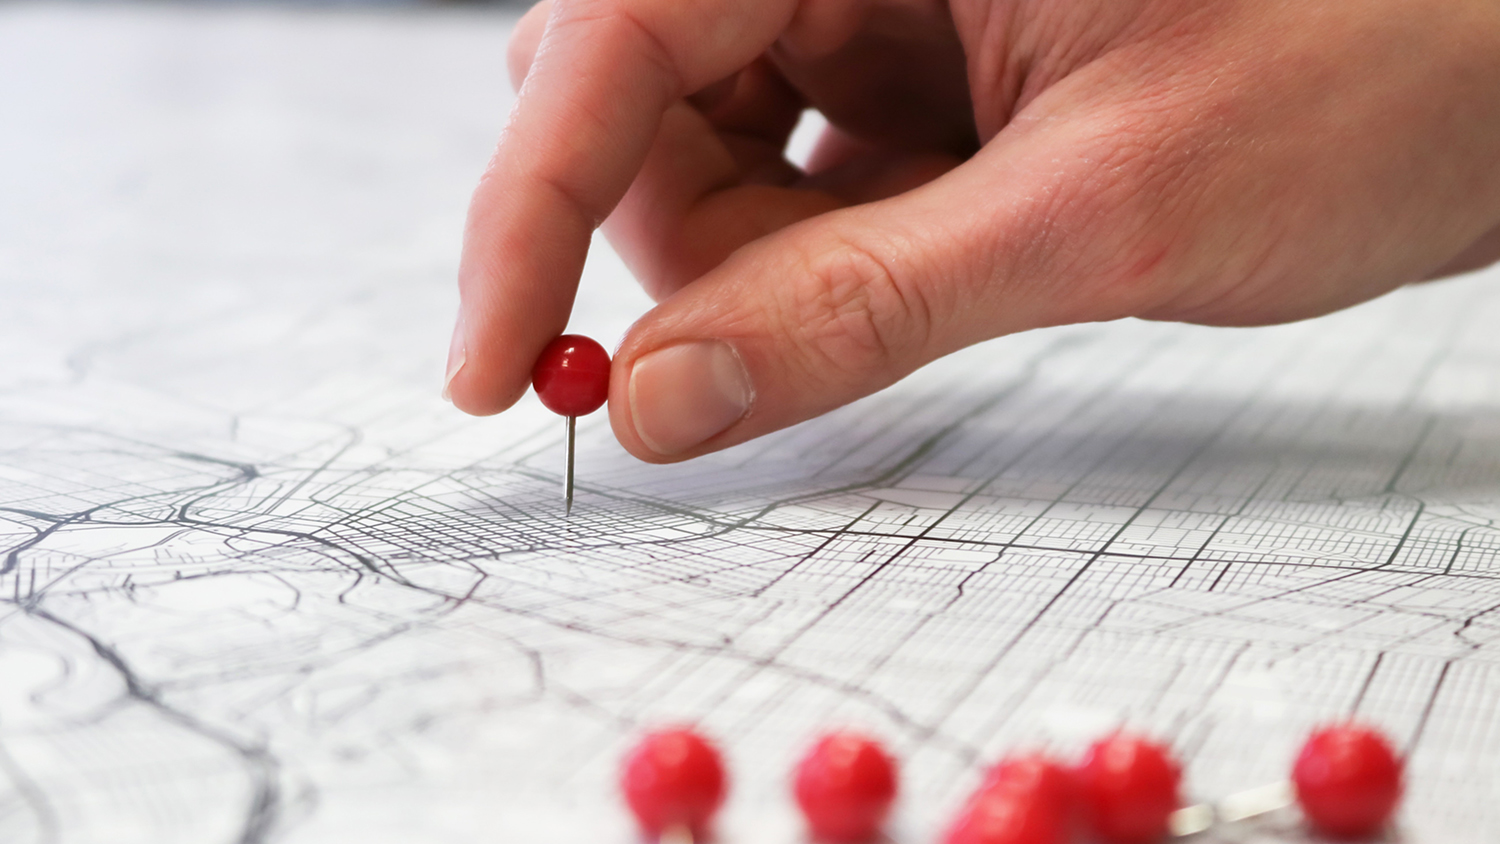 A hand places a red pushpin on a paper streetmap